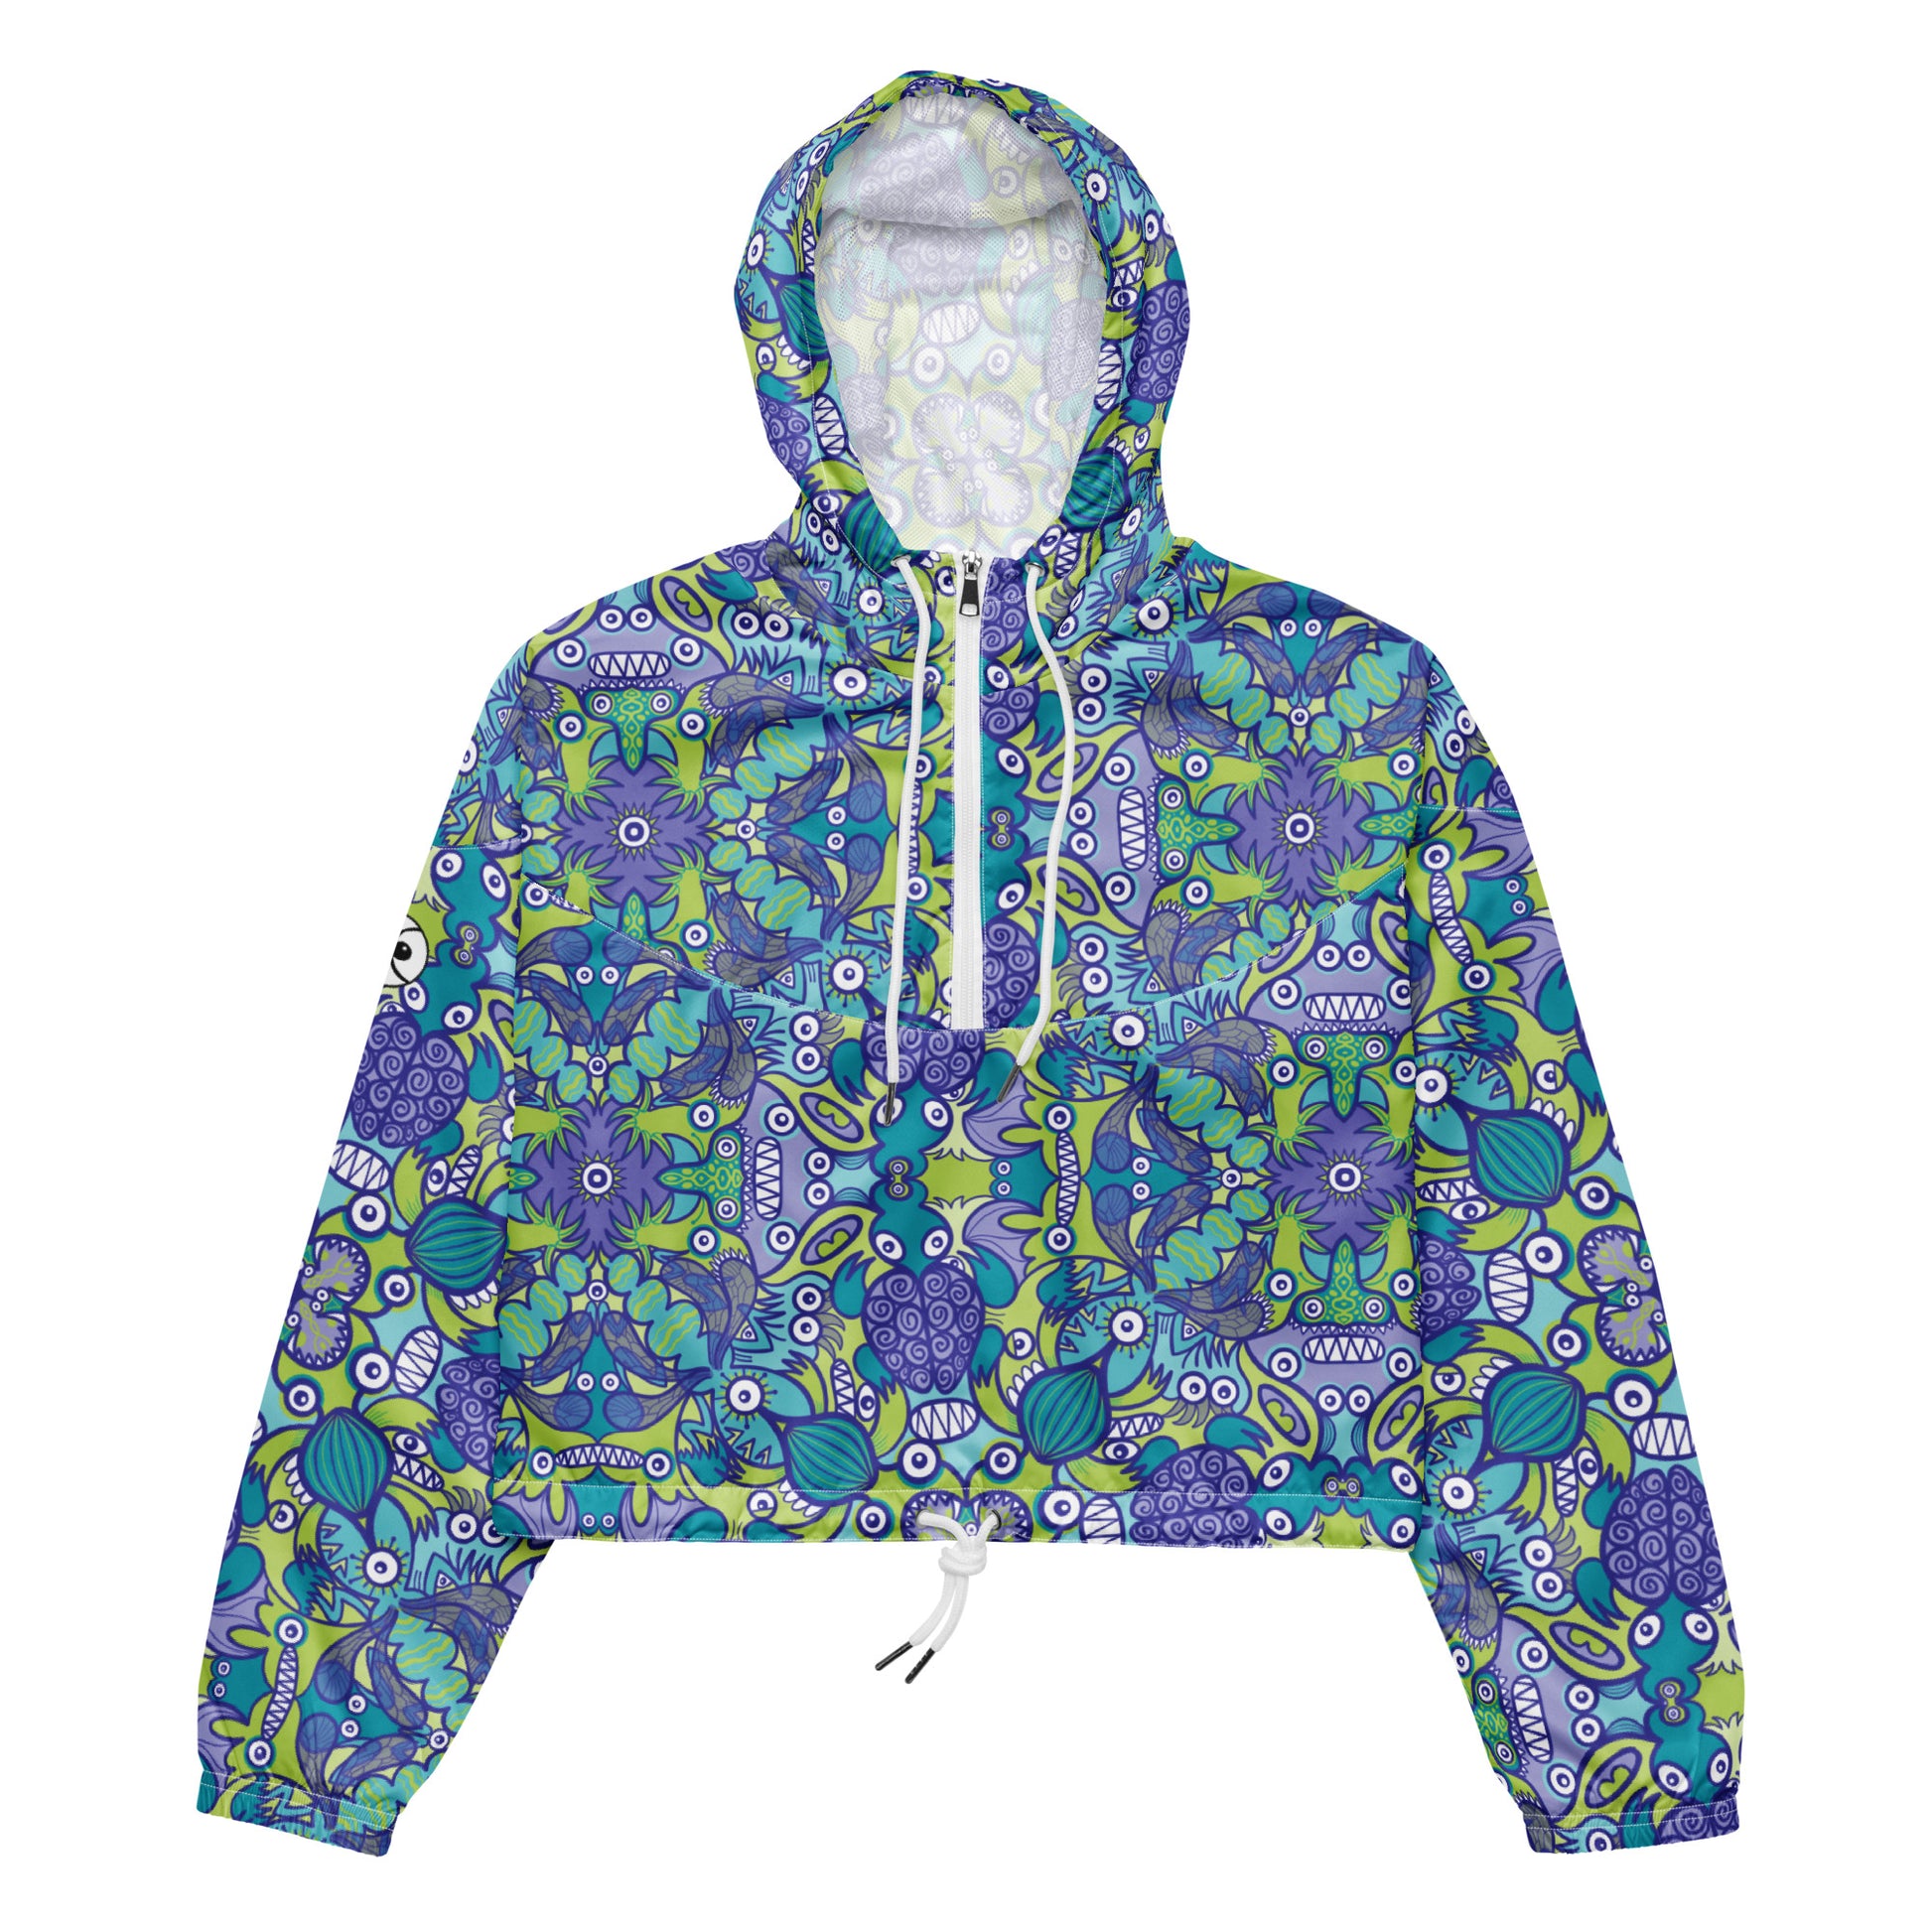 Once upon a time in an ocean full of life Women’s cropped windbreaker. Front view